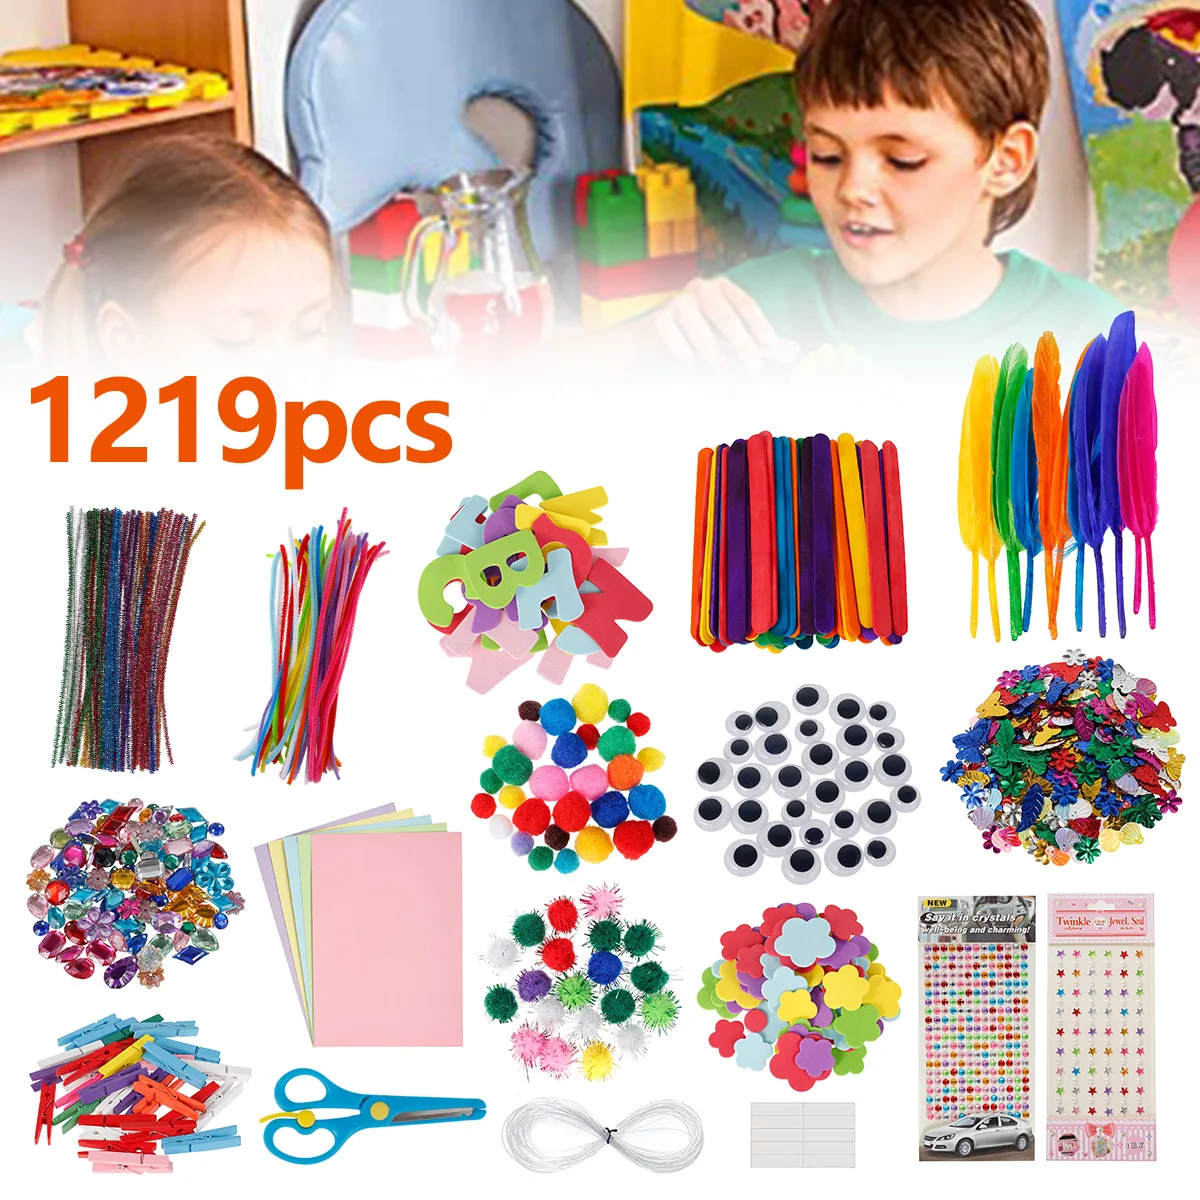 https://ae01.alicdn.com/kf/S039e28255323418a9088366c73decb09q/DIY-Art-Craft-Sets-Craft-Supplies-Kits-for-Kids-Toddlers-Children-Craft-Set-Creative-Craft-Supplies.jpg